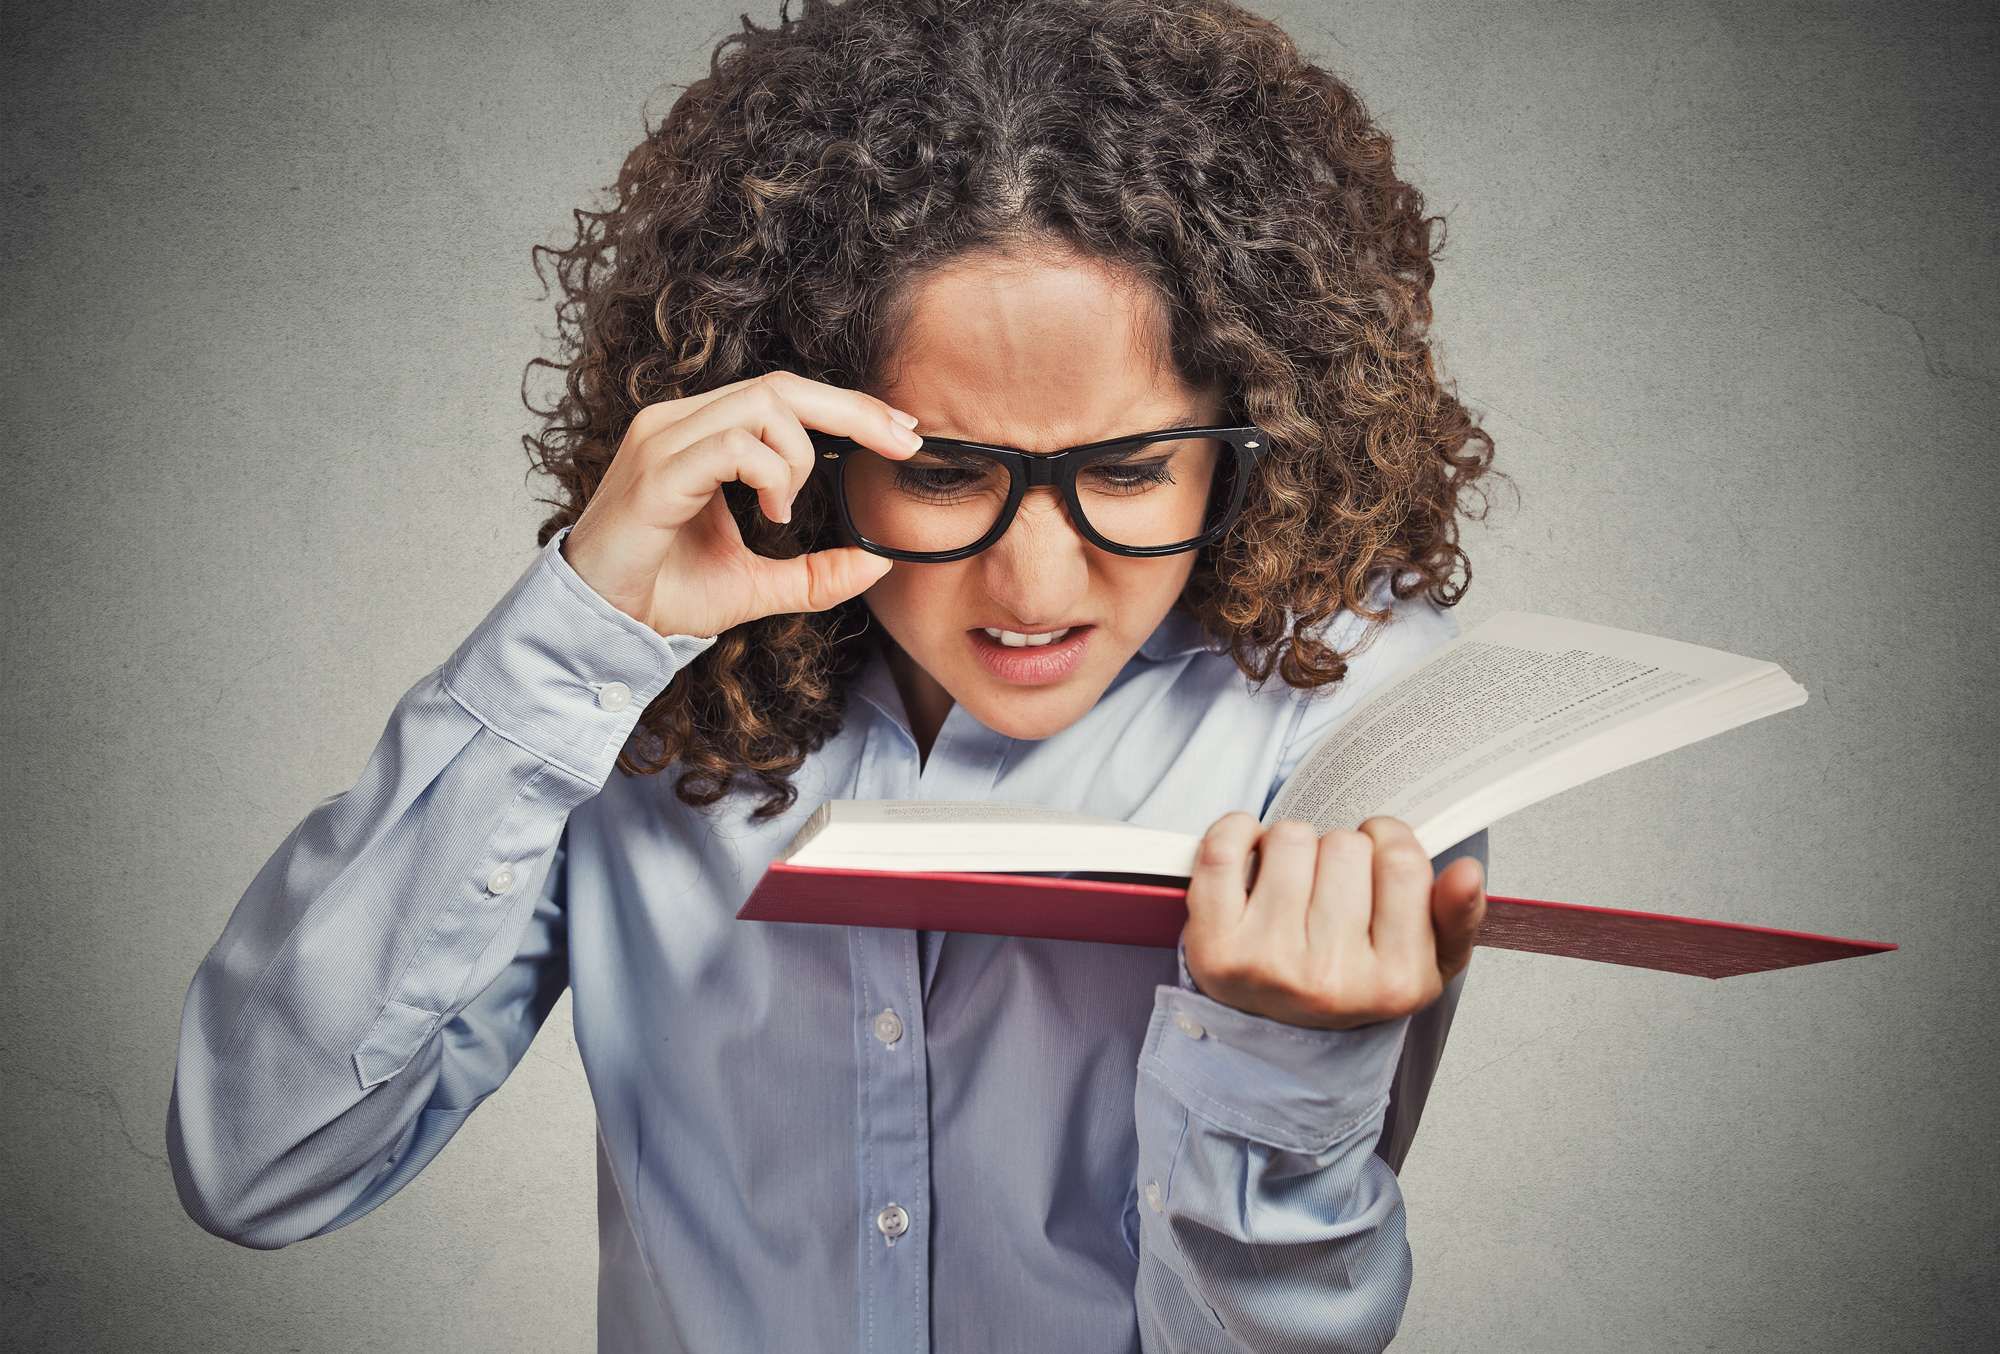 Woman adjusts glasses while trying to read book